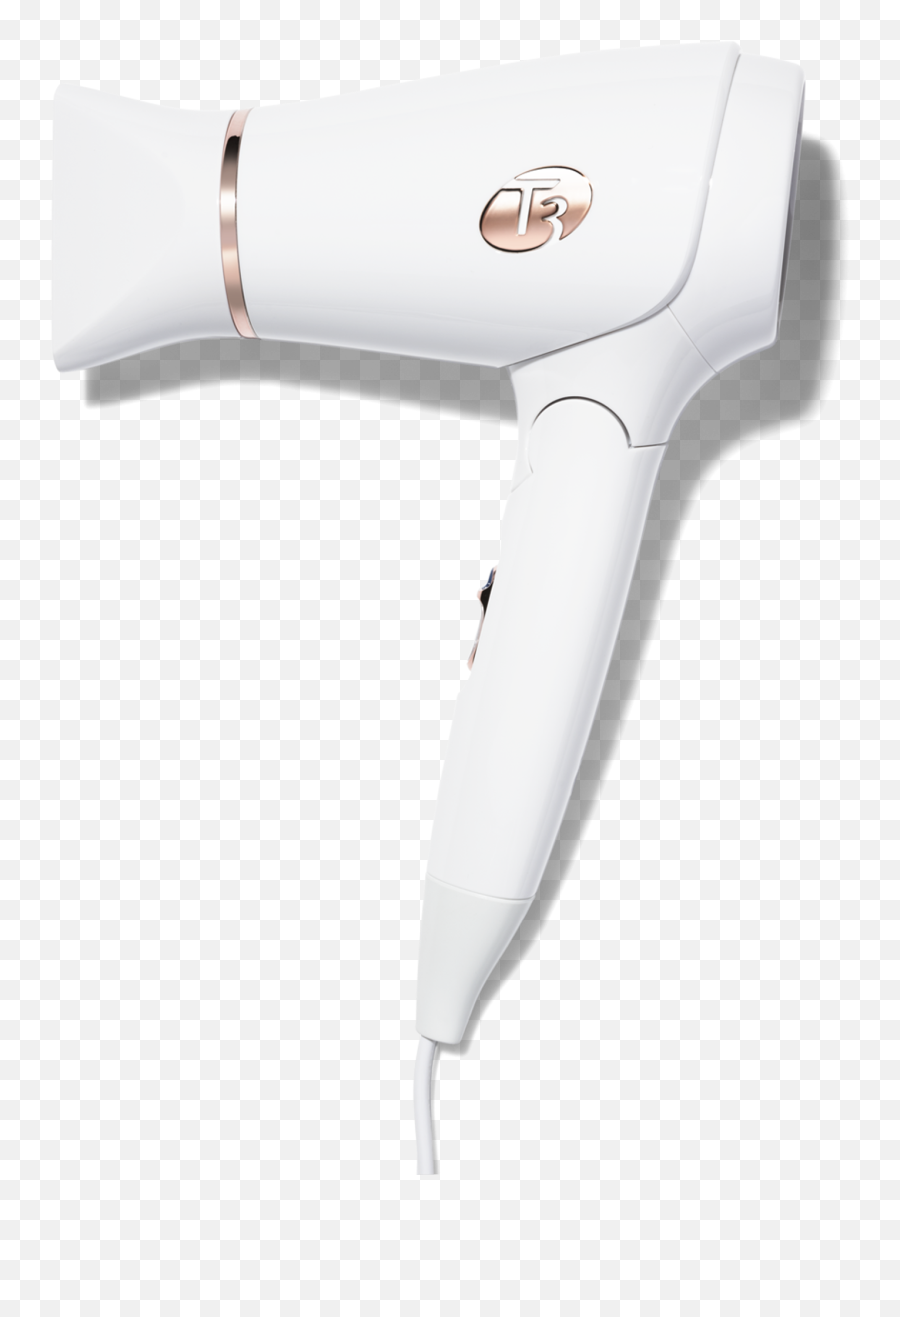 Compact Folding Hair Dryer Png